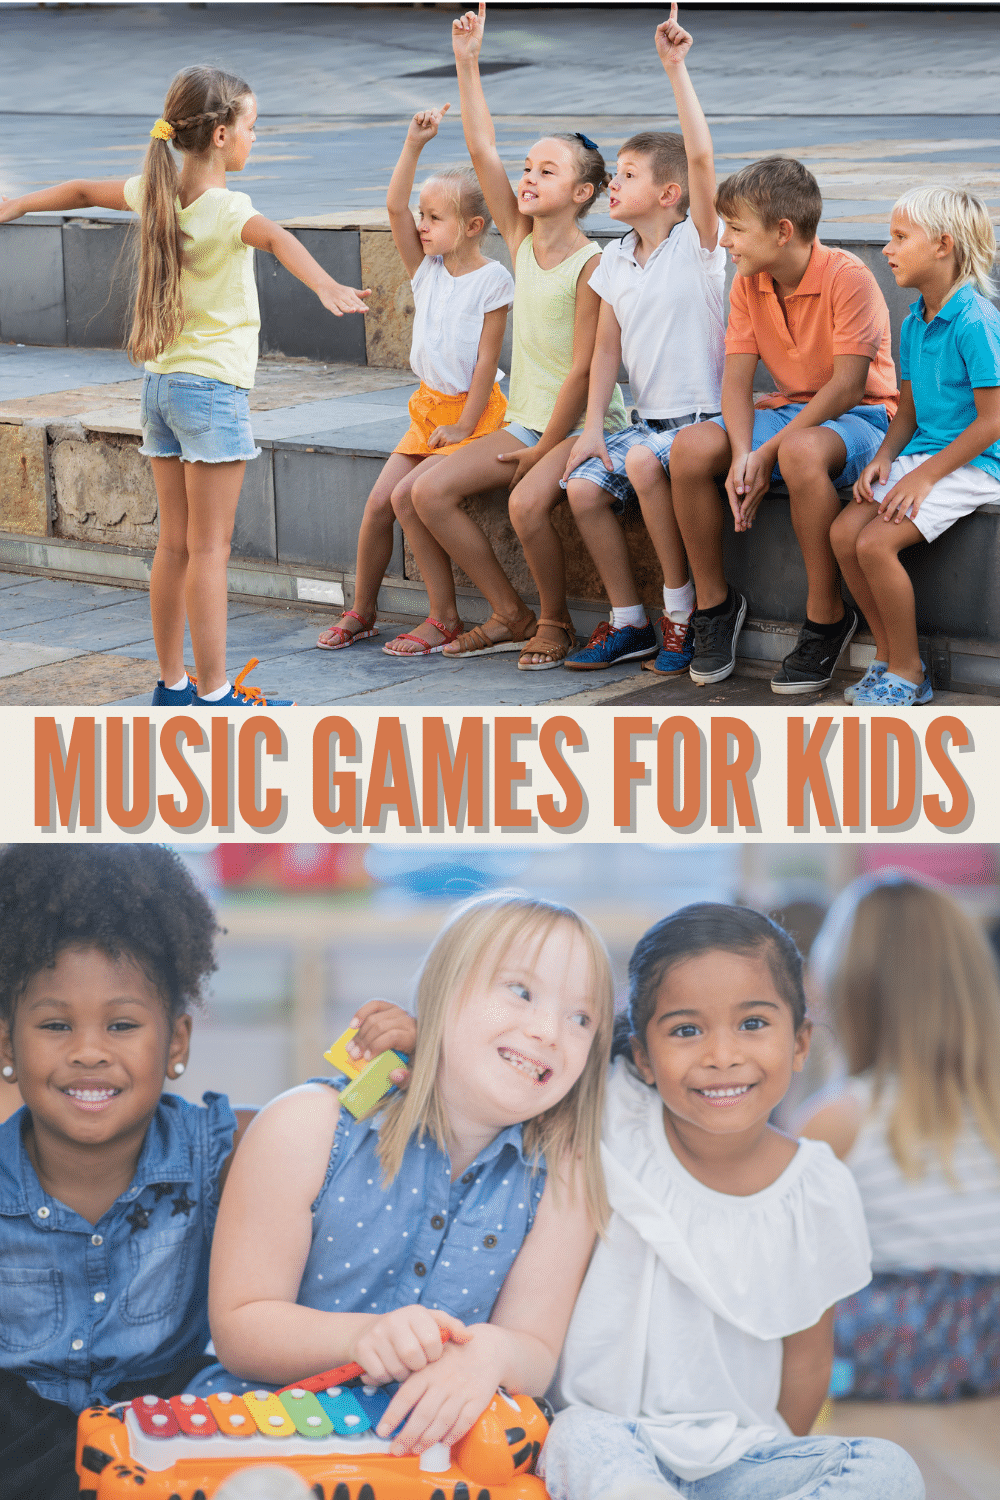 This is such a wide variety of fun music games that are fun for kids of all ages! Perfect for keeping kids busy, family or classroom fun, or to foster a love of music and art. Your kids will have a ton of fun with these games! #kidsactivities #musicactivities #games via @wondermomwannab